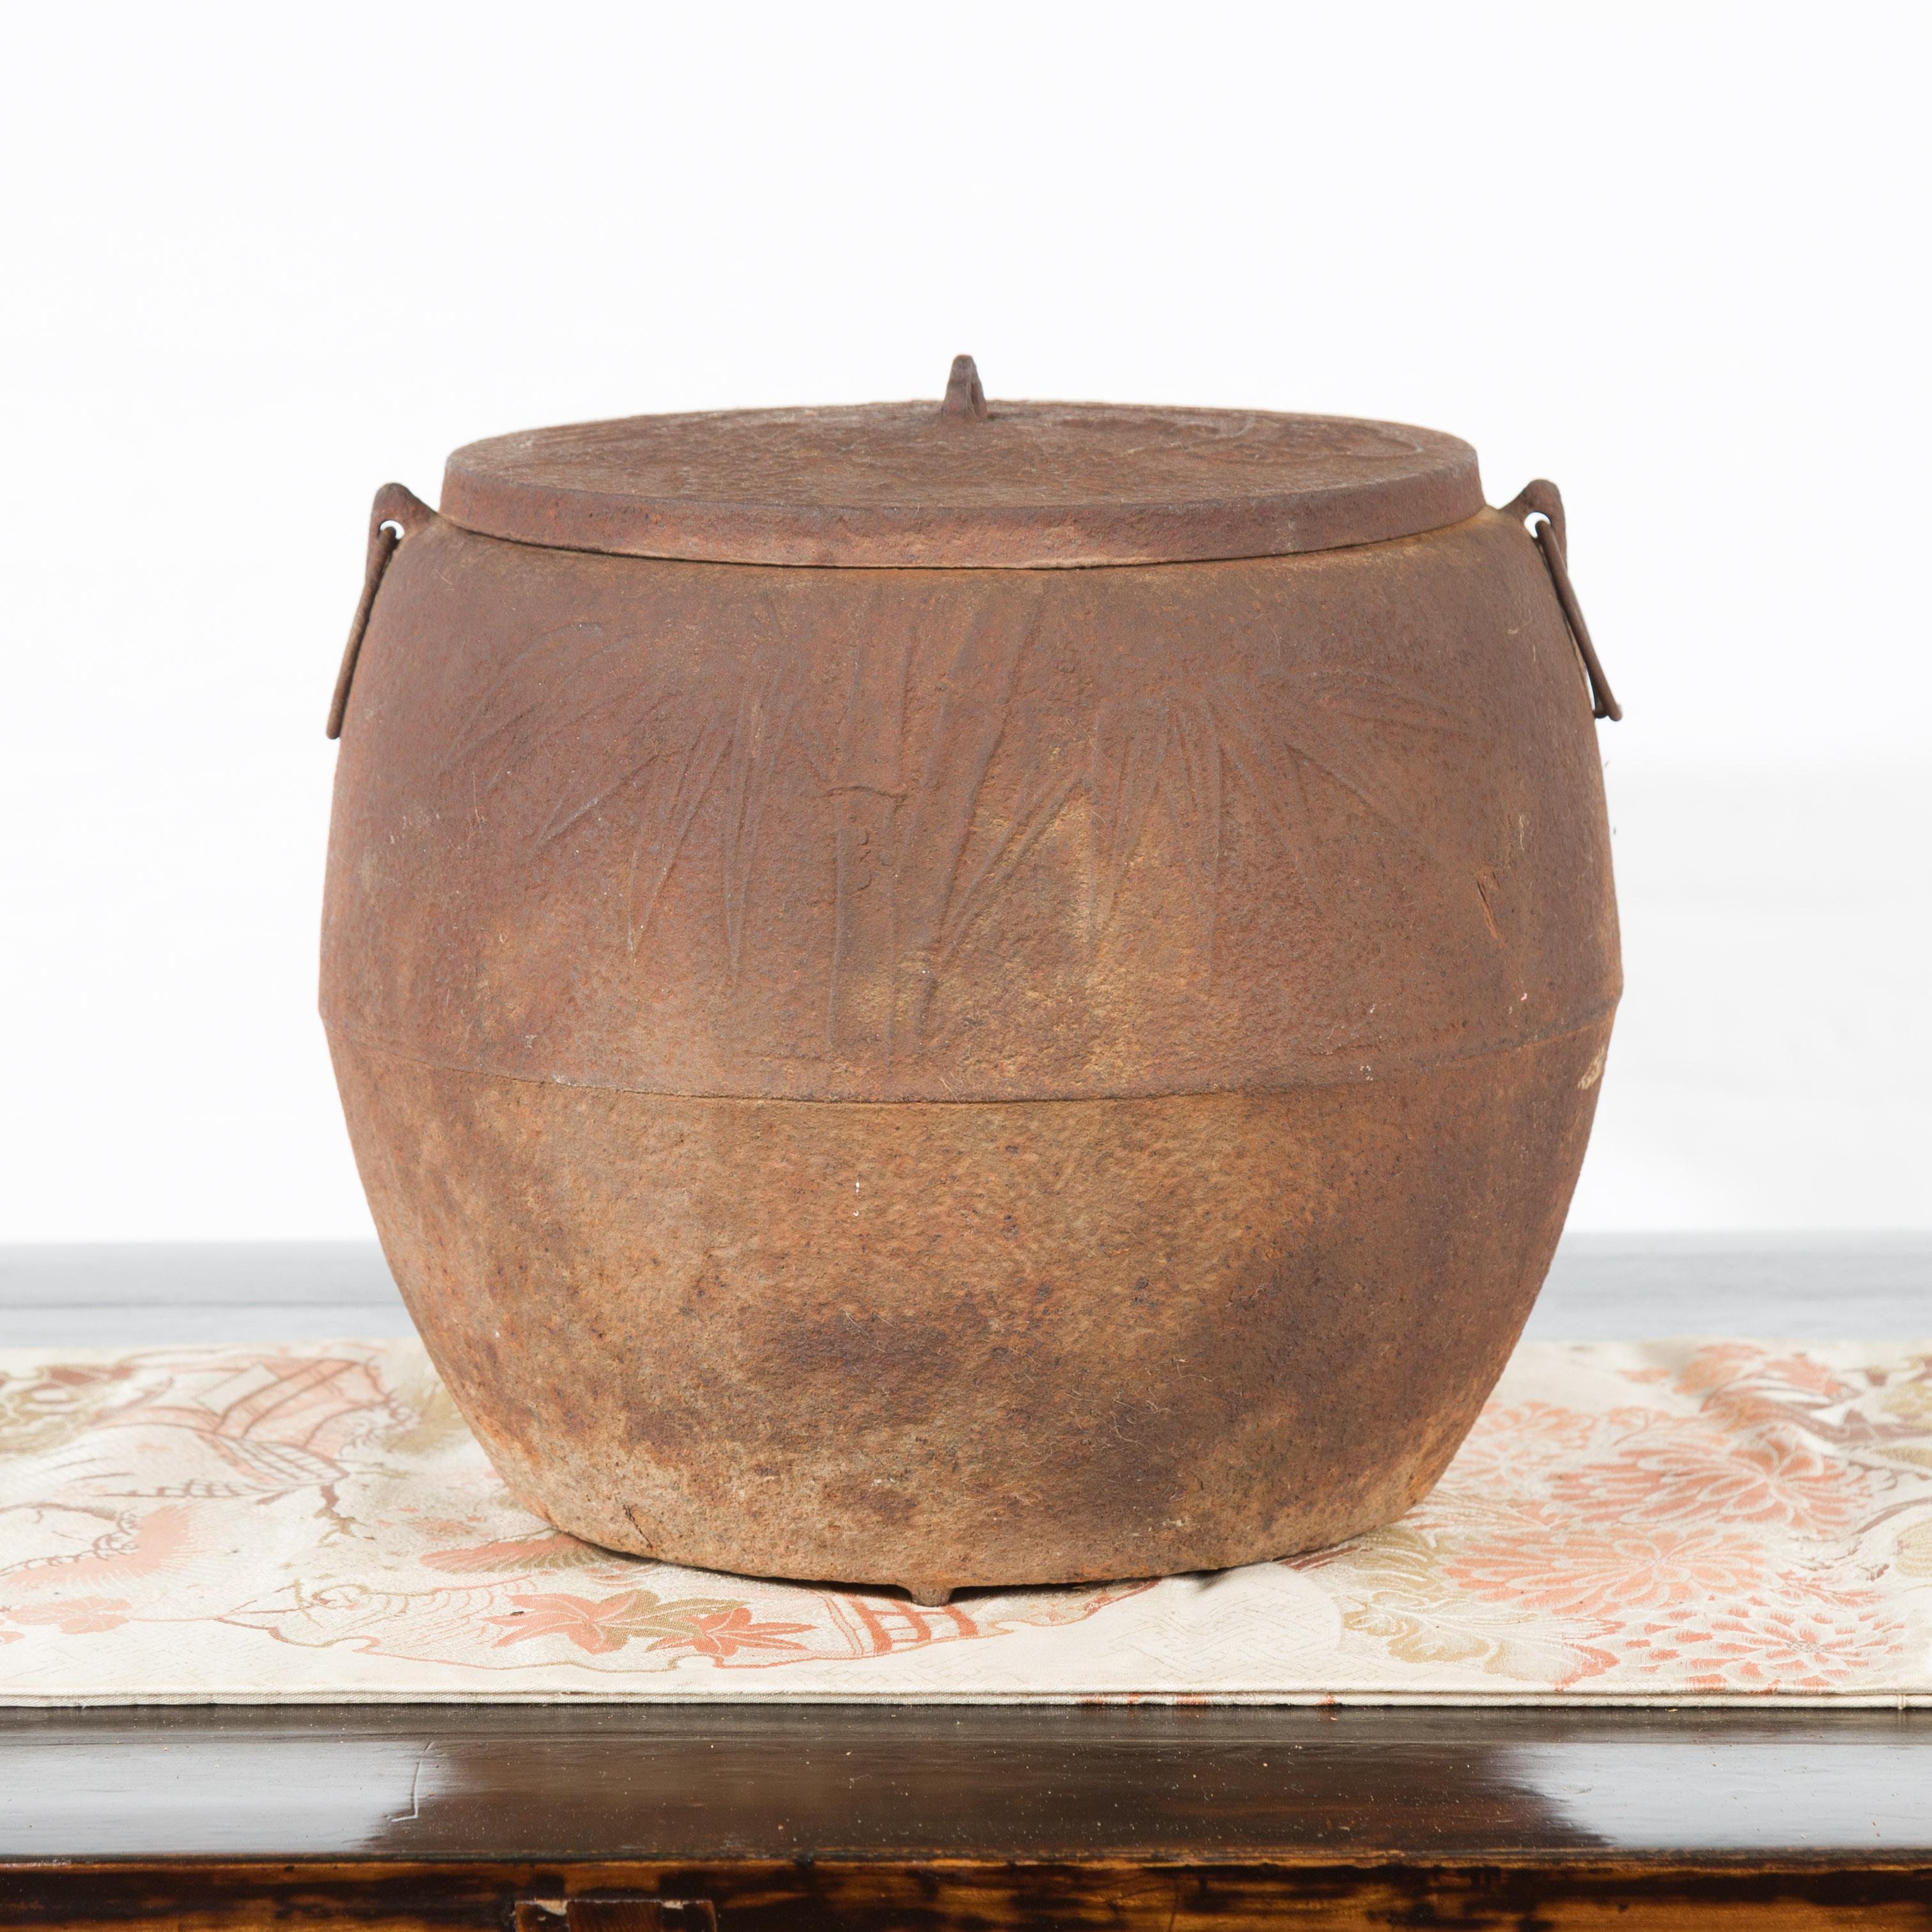 A Japanese Meiji period iron cooking pot from the early 20th century, with foliage motifs and distressed patina. Created in Japan during the early years of the 20th century, this iron cooking pot features a rusty circular body topped with a lid.